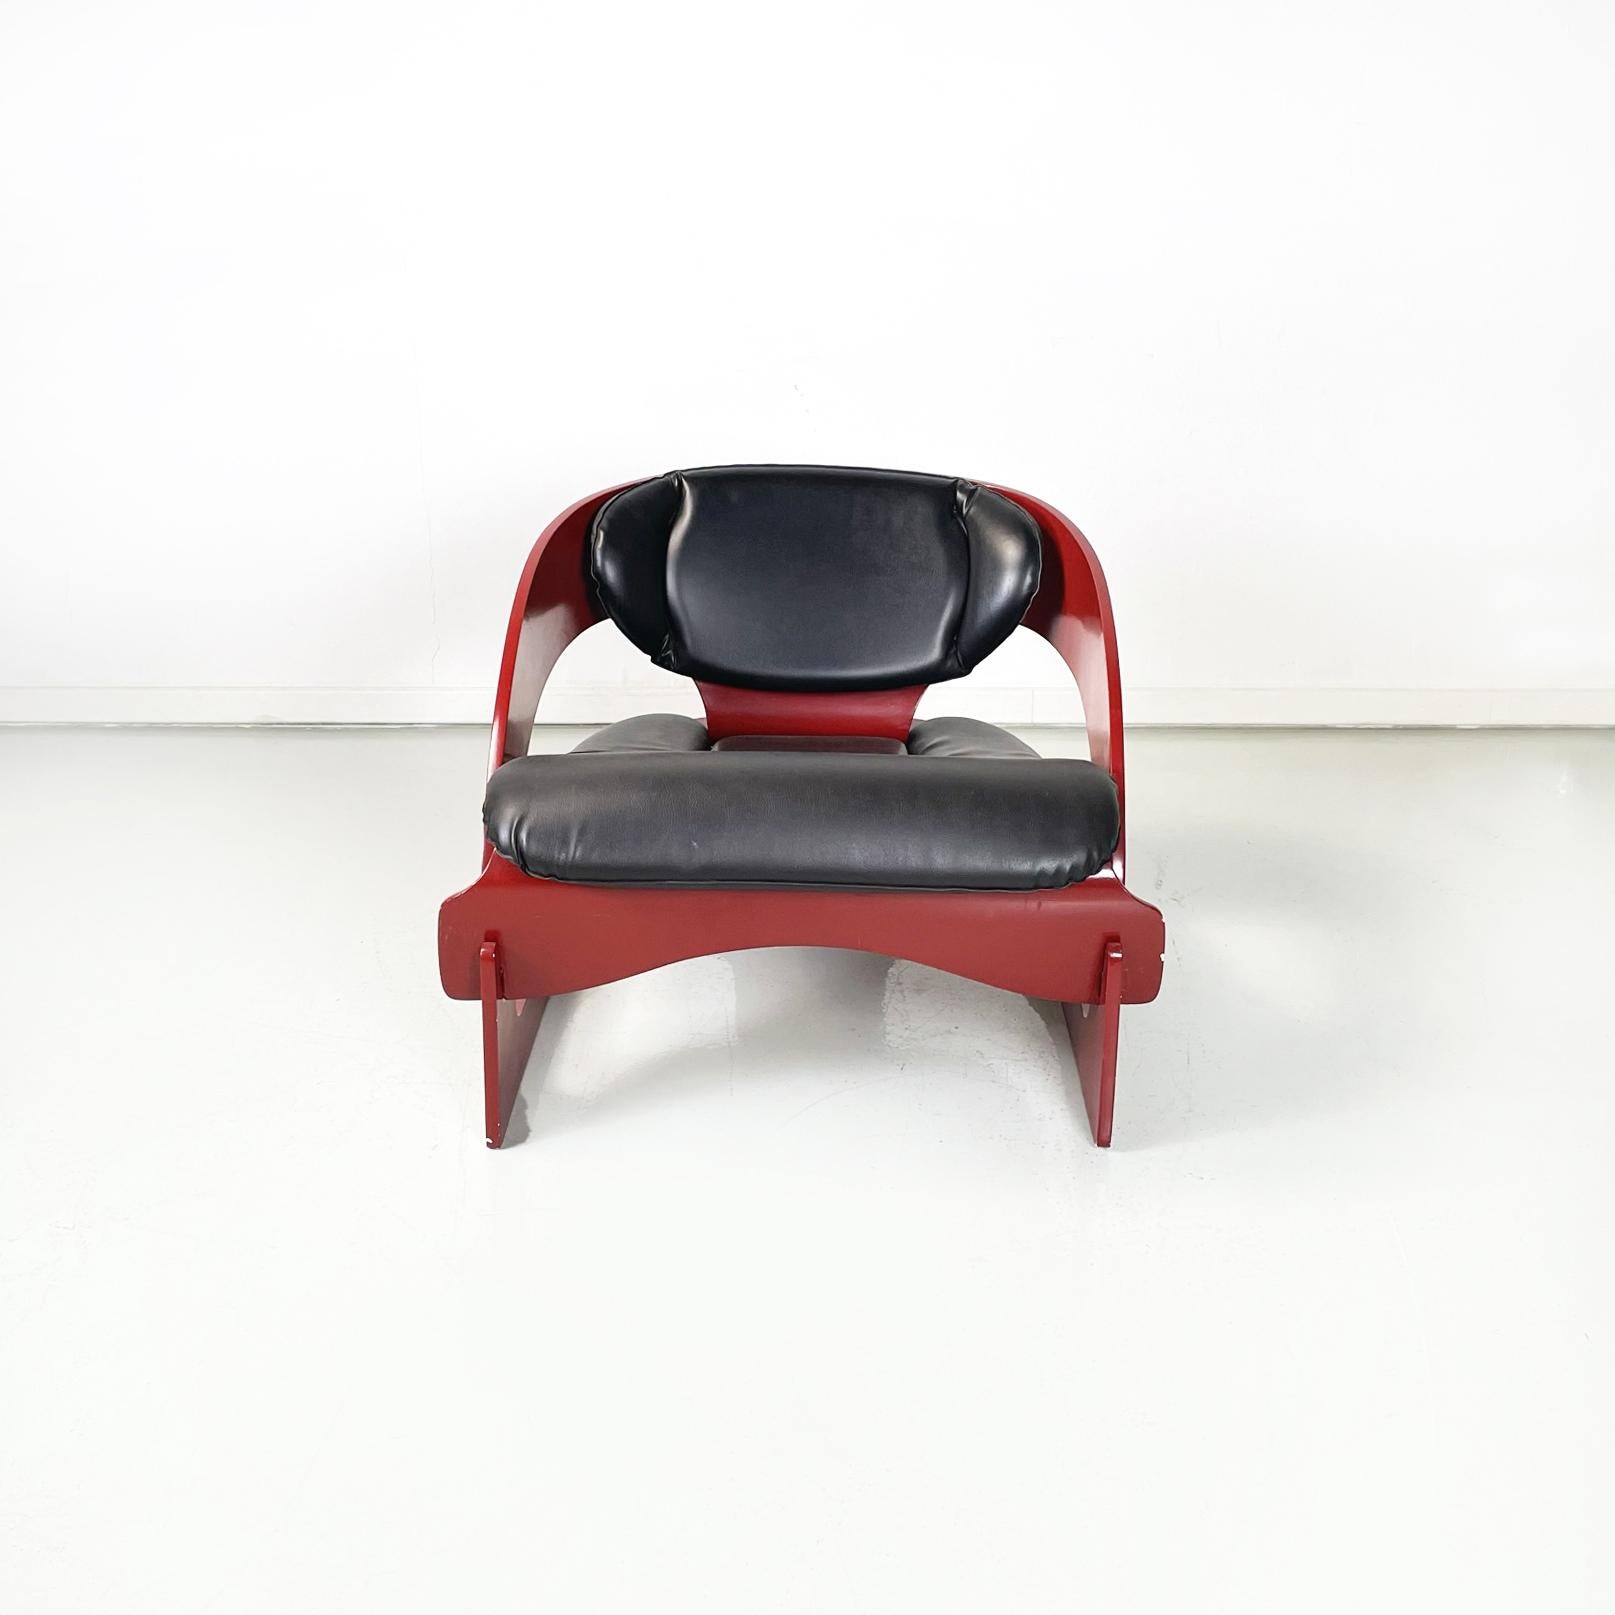 Italian modern red wood Armchair mod. 4801 by Joe Colombo for Kartell, 1970s.
Armchair mod. 4801 with structure made up of different interlocking parts, in red-bordeaux painted wood. The semi-oval seat and the oval backrest are padded and covered